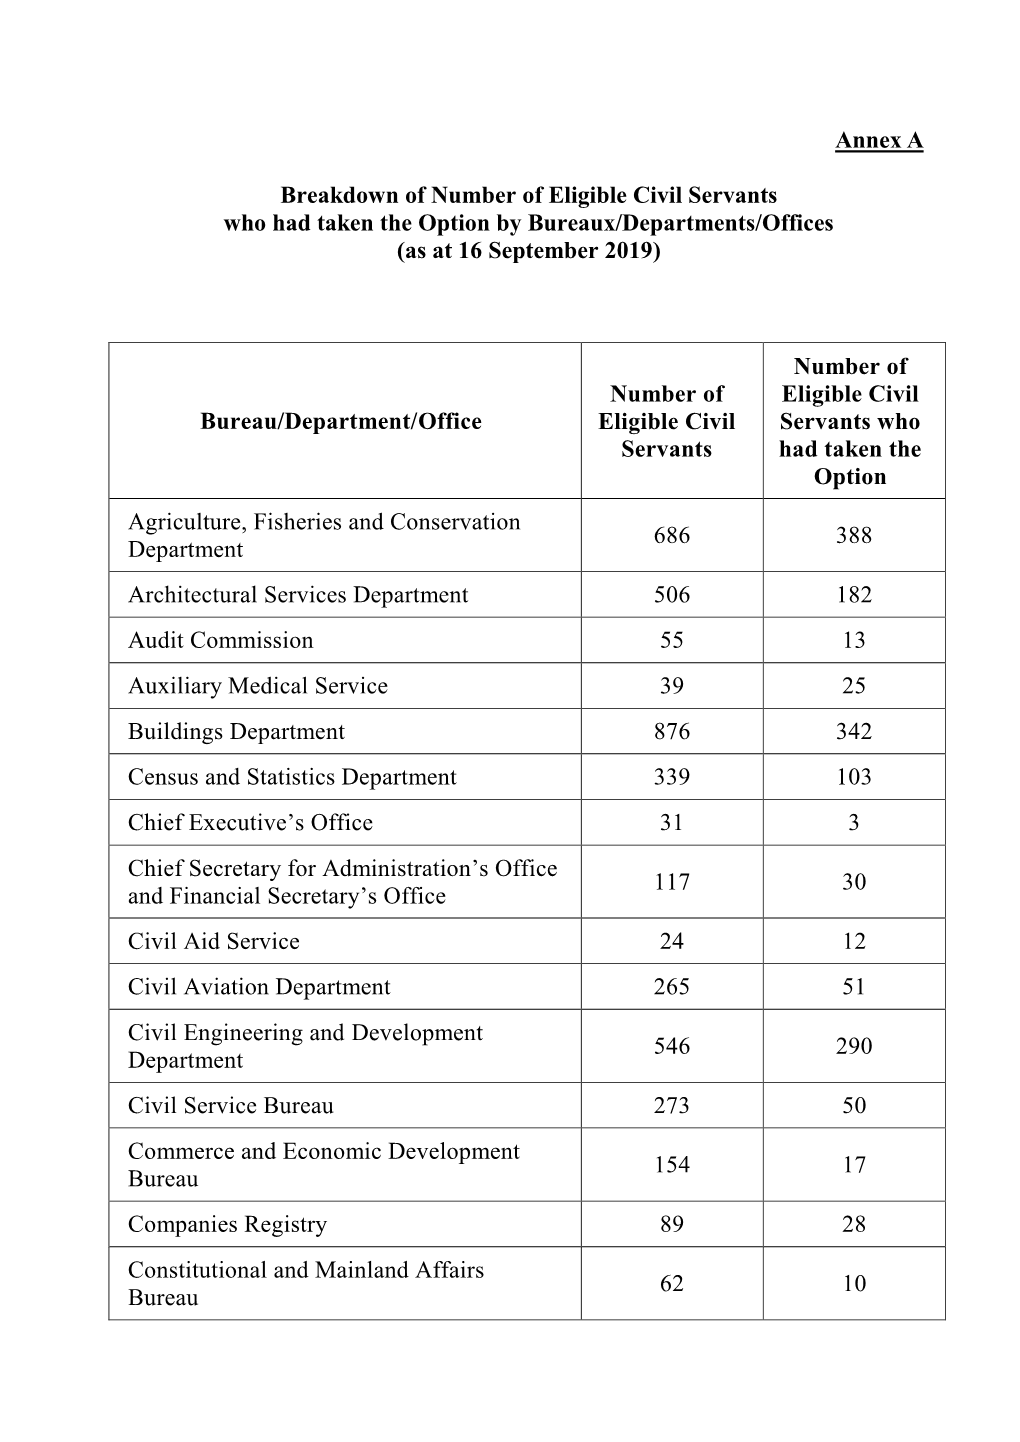 Annex a Breakdown of Number of Eligible Civil Servants Who Had